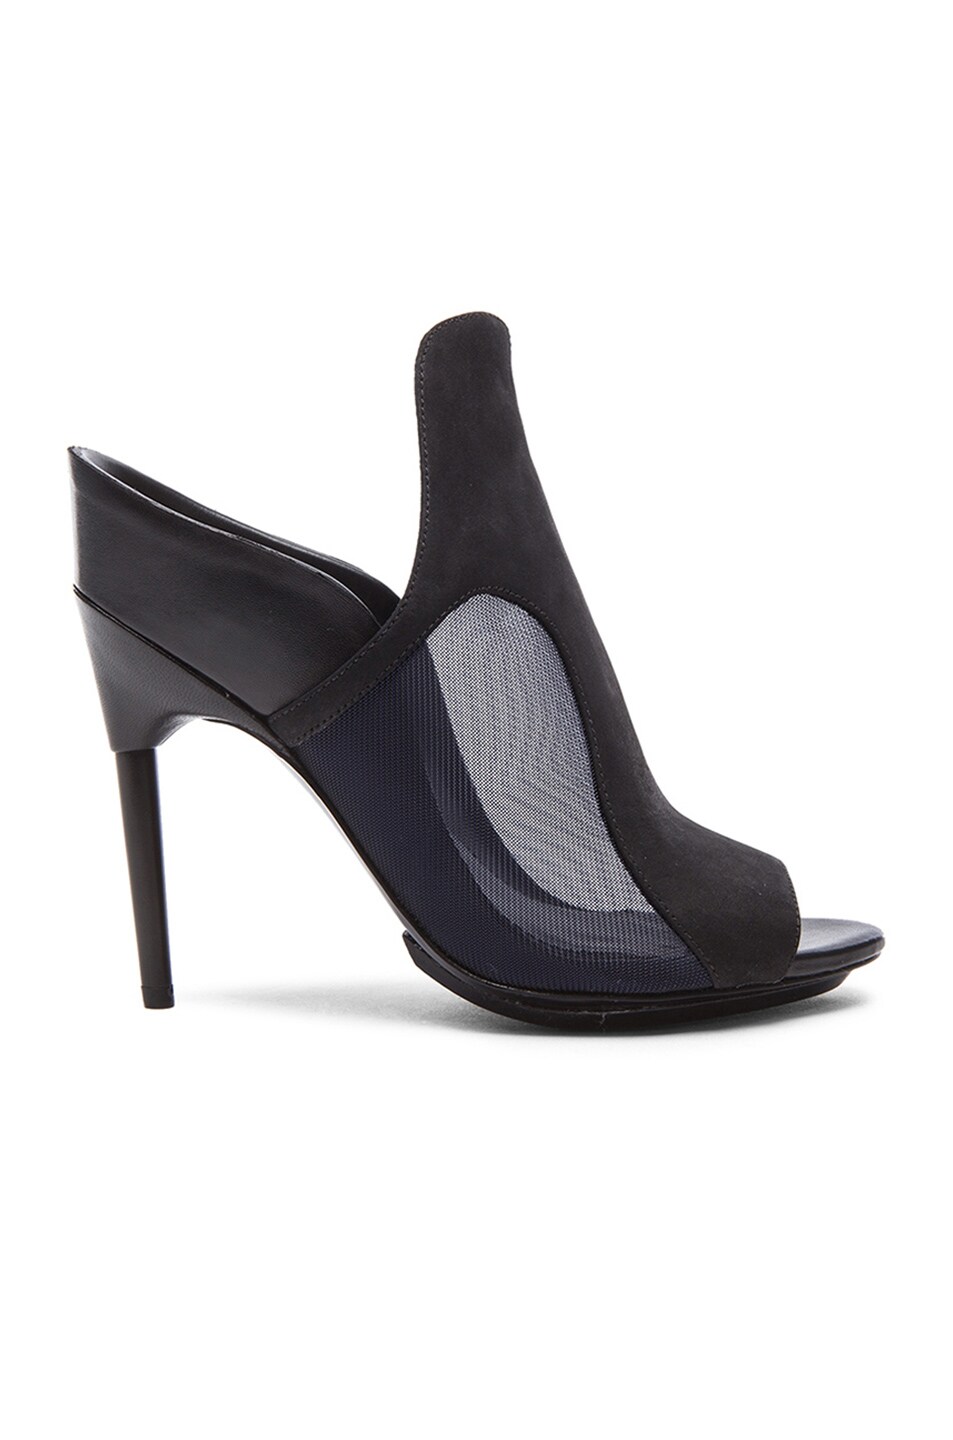 Image 1 of 3.1 phillip lim Aria High Heel Calfskin Leather Mules in Black & Blue